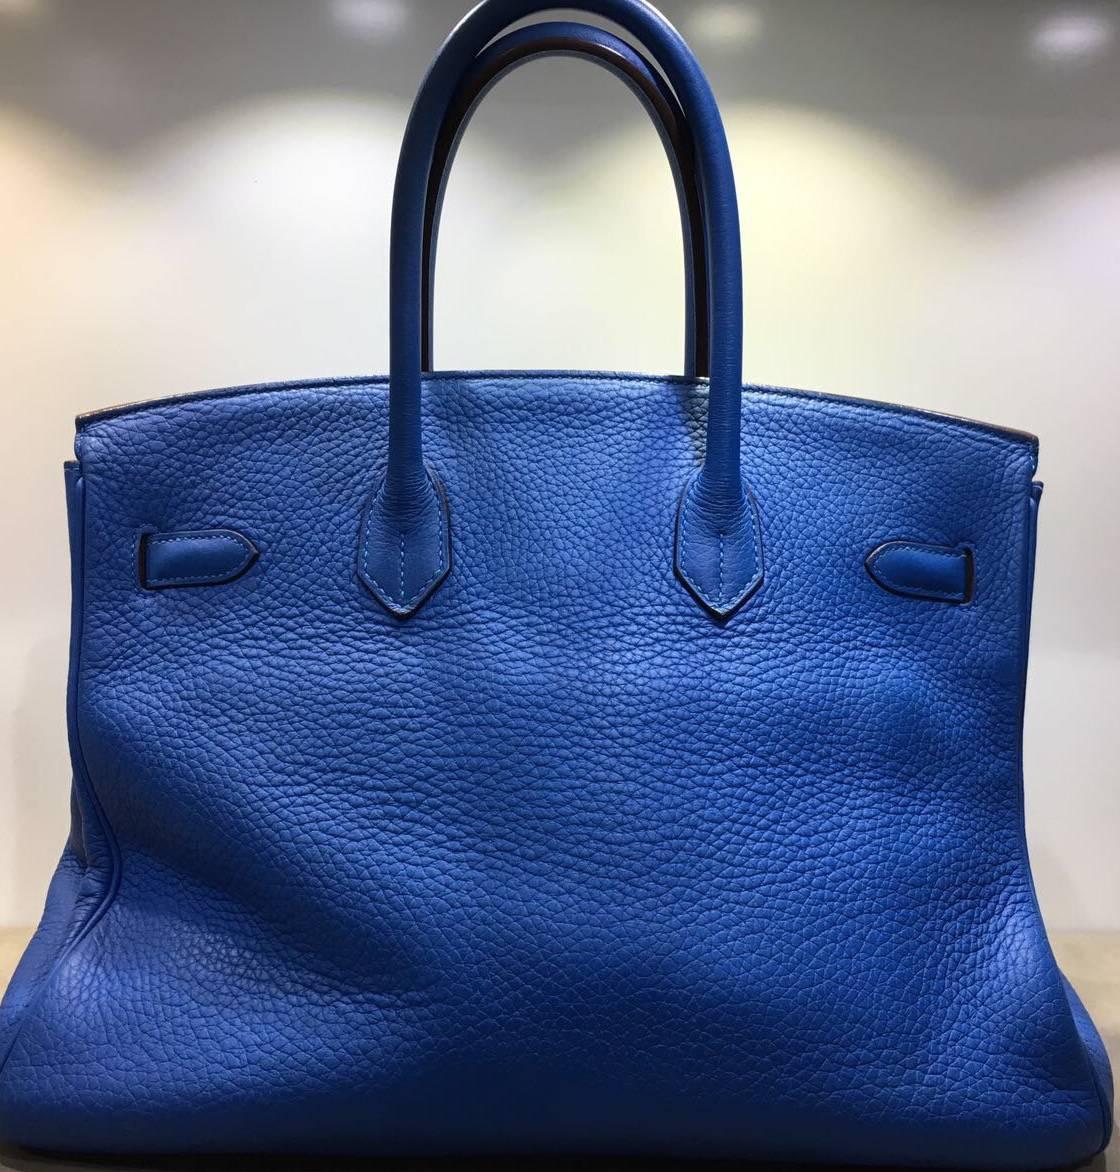 - Hermes cobalt blue togo leather 35cm BIrkin bag with palladium hardware from year 2011. This rare blue Hermes Birkin bag is in excellent condition. OnceStyle can guarantee you that this Hermes Birkin bag is 100% authentic!

- Code: O. 

- Made in